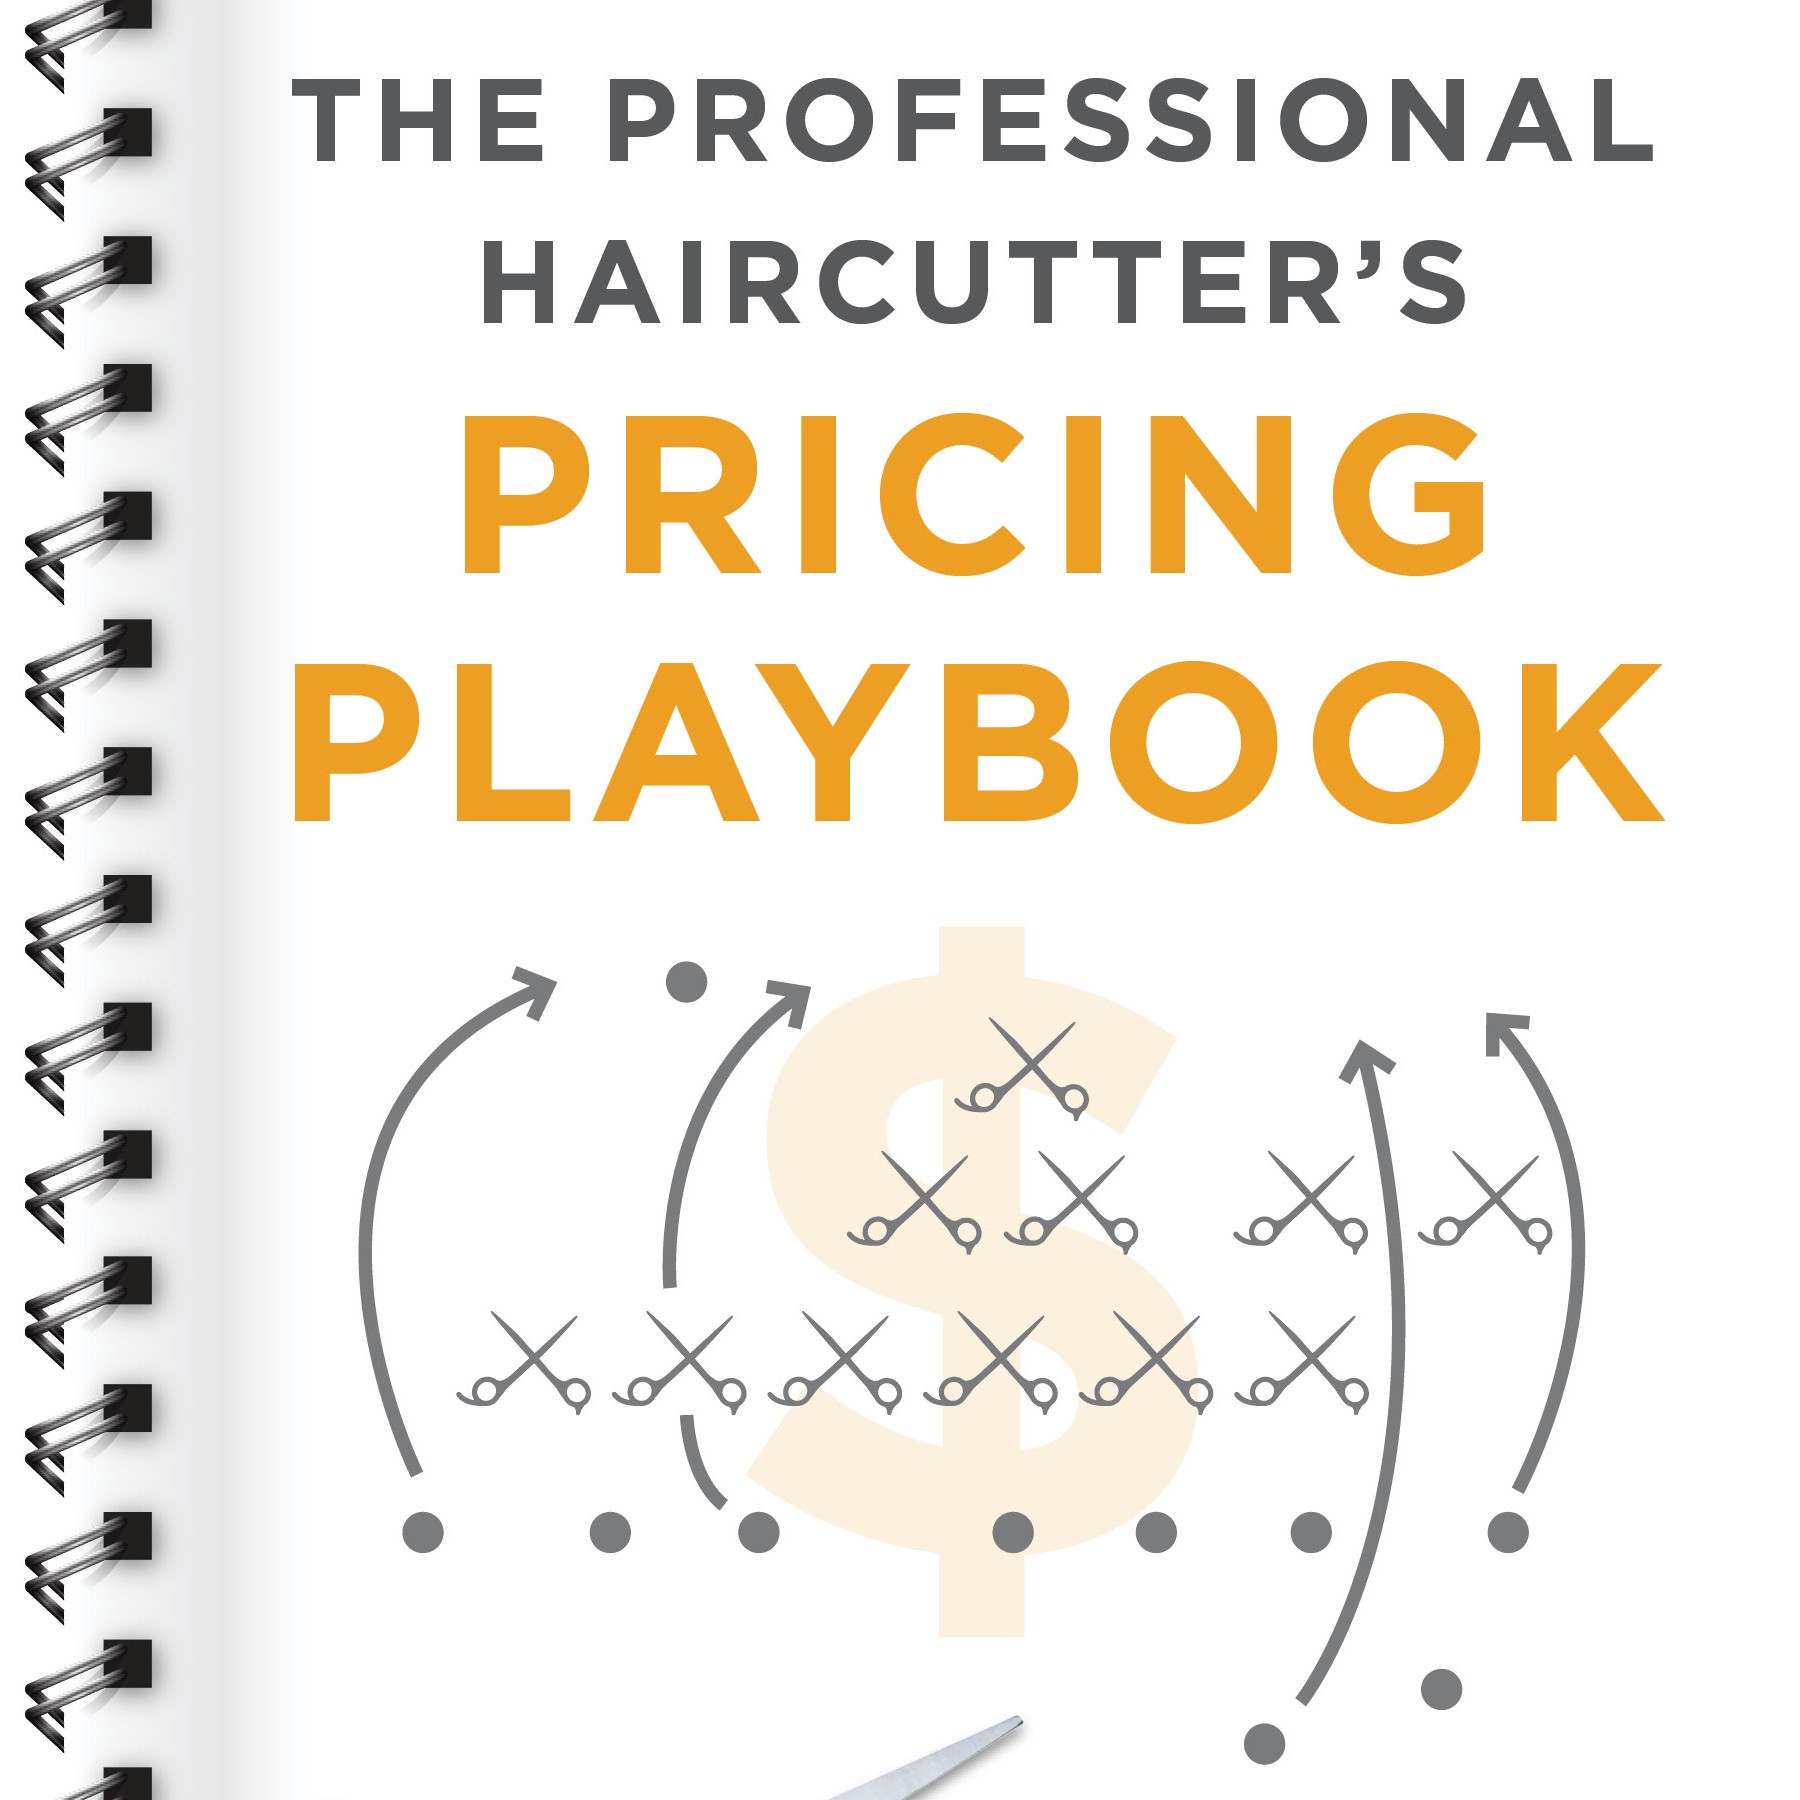 The Professional Haircutter’s Pricing Playbook